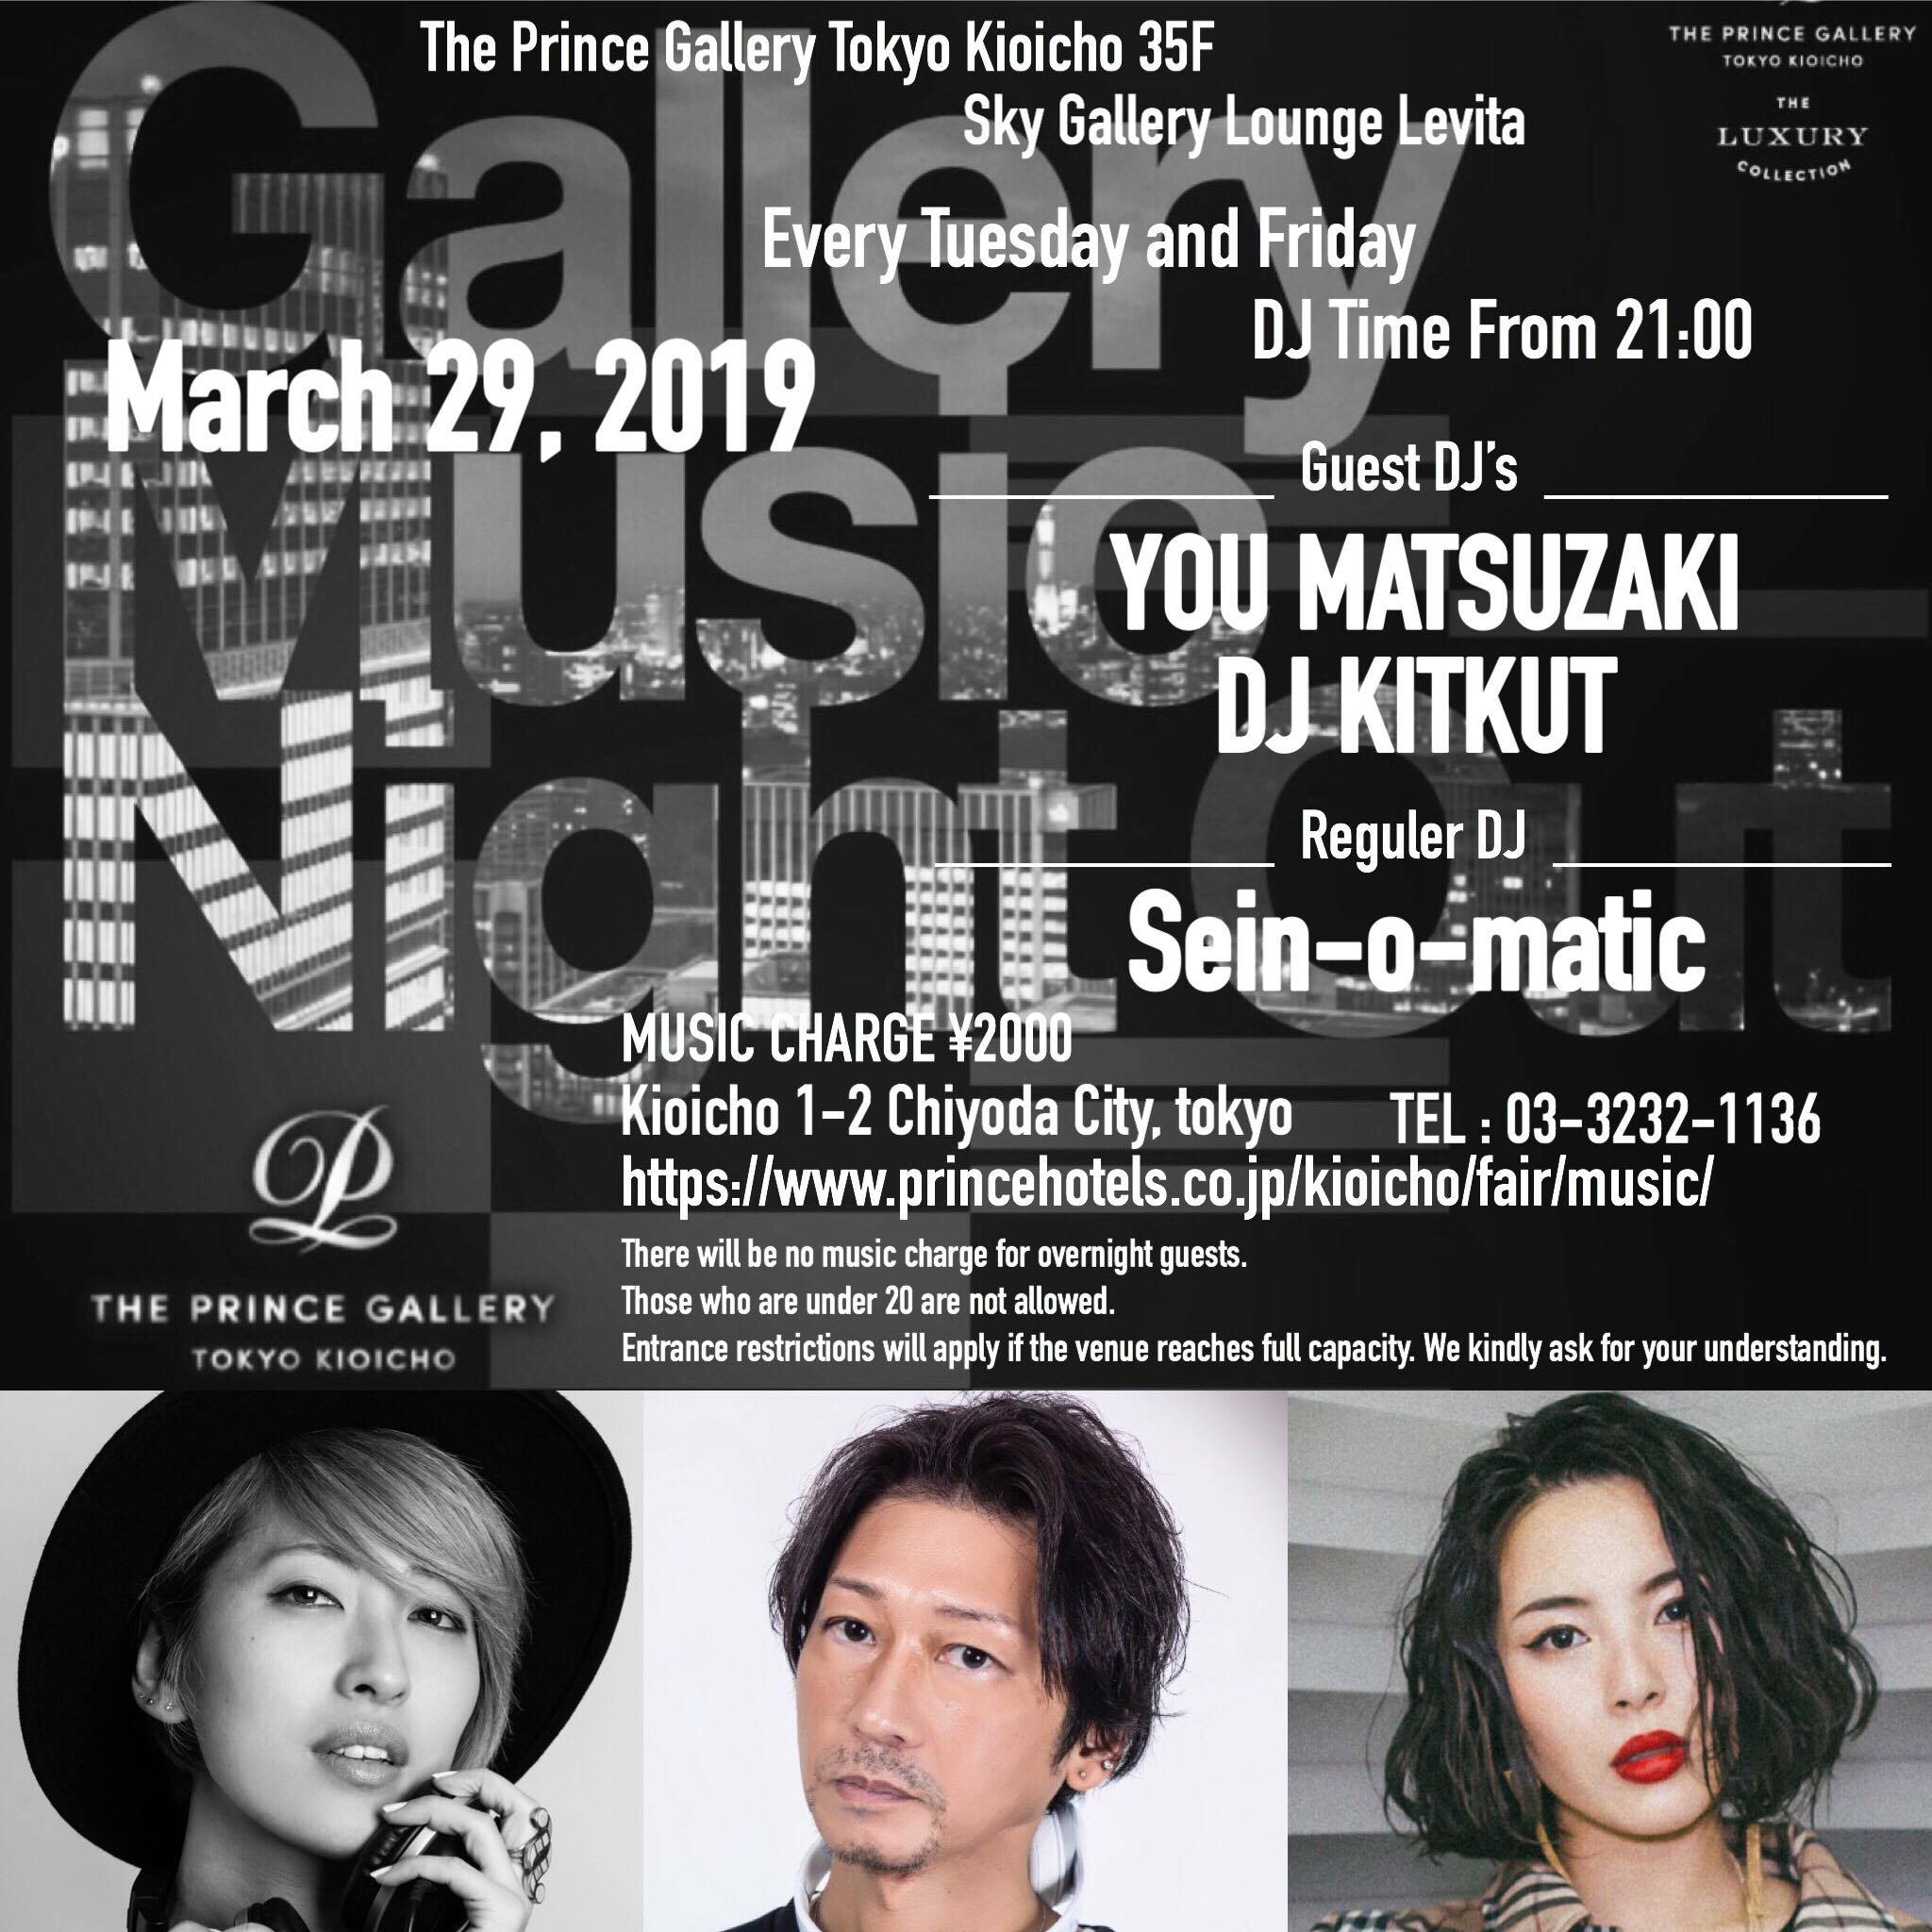 2019/3/29(fri)Gallery Music Night Out @ The Prince Gallery